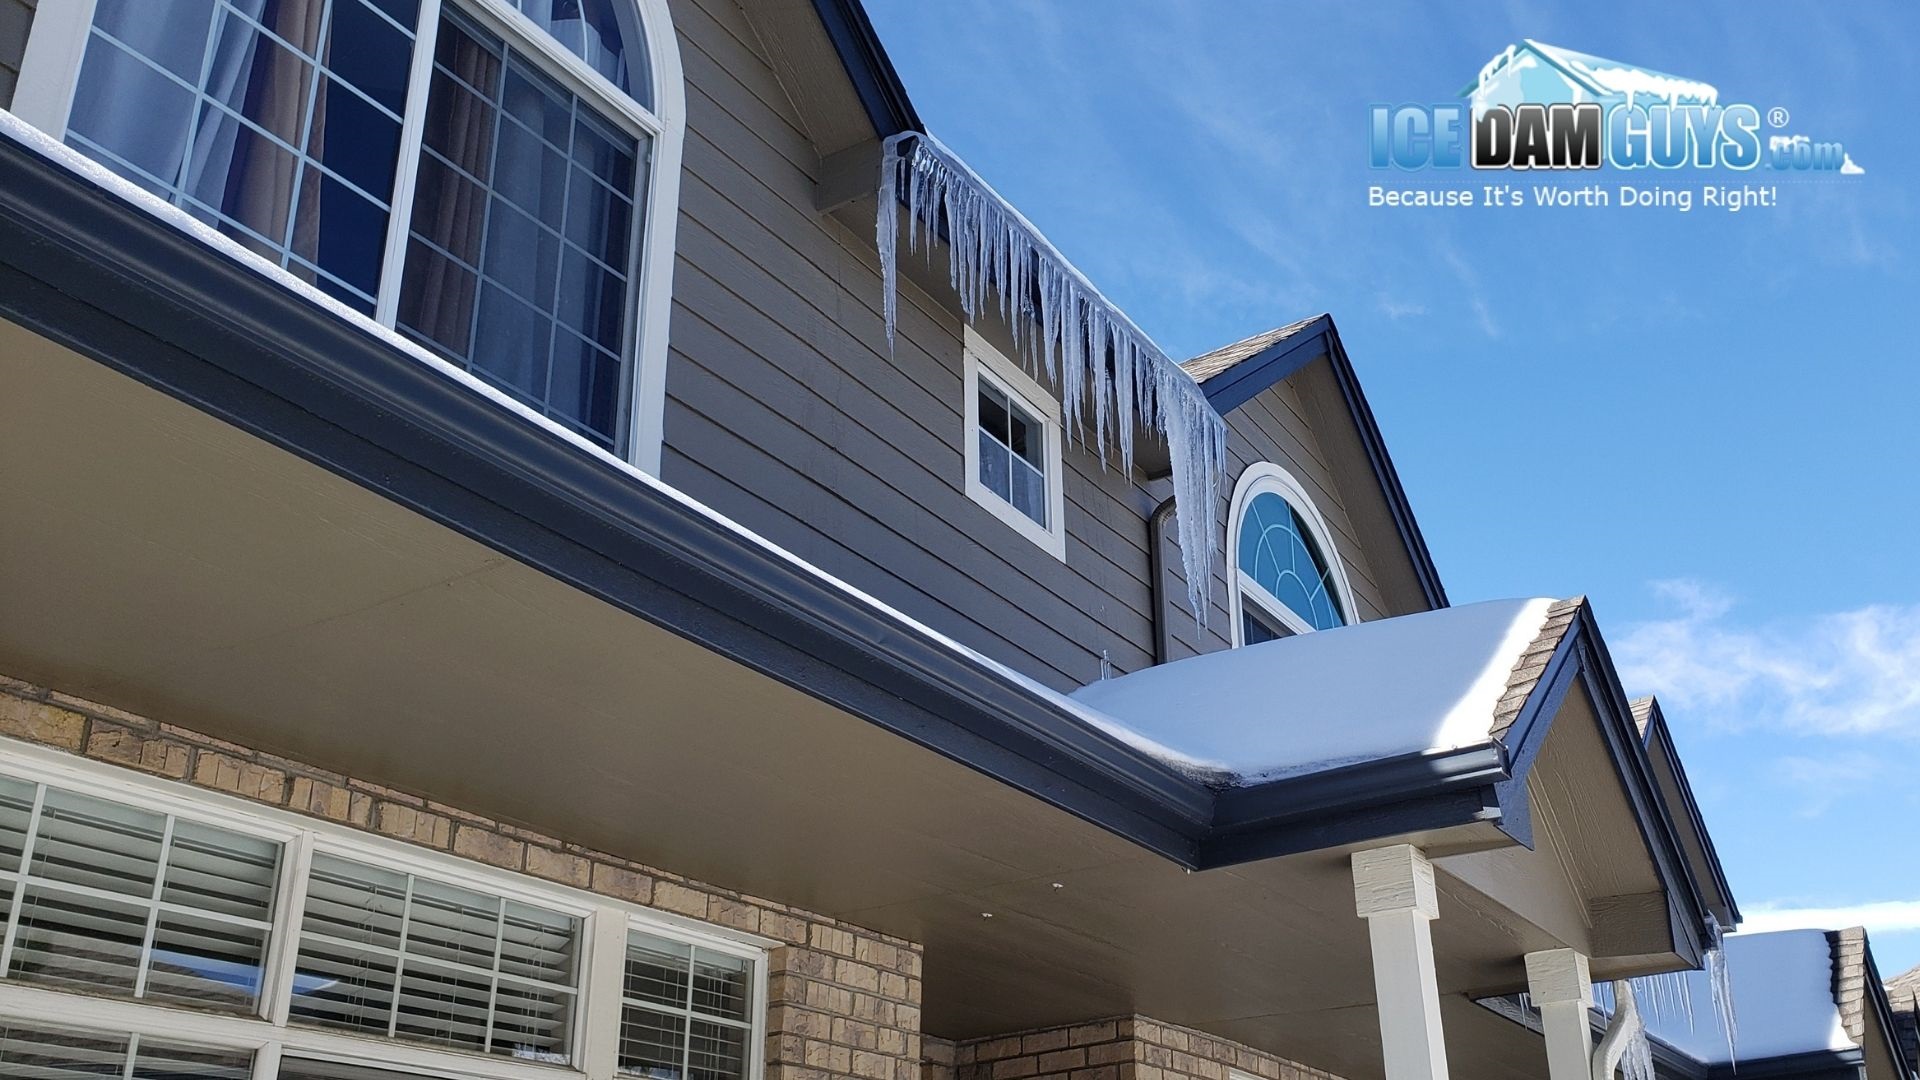 Missoula ice dams removed by the Ice Dam Guys®